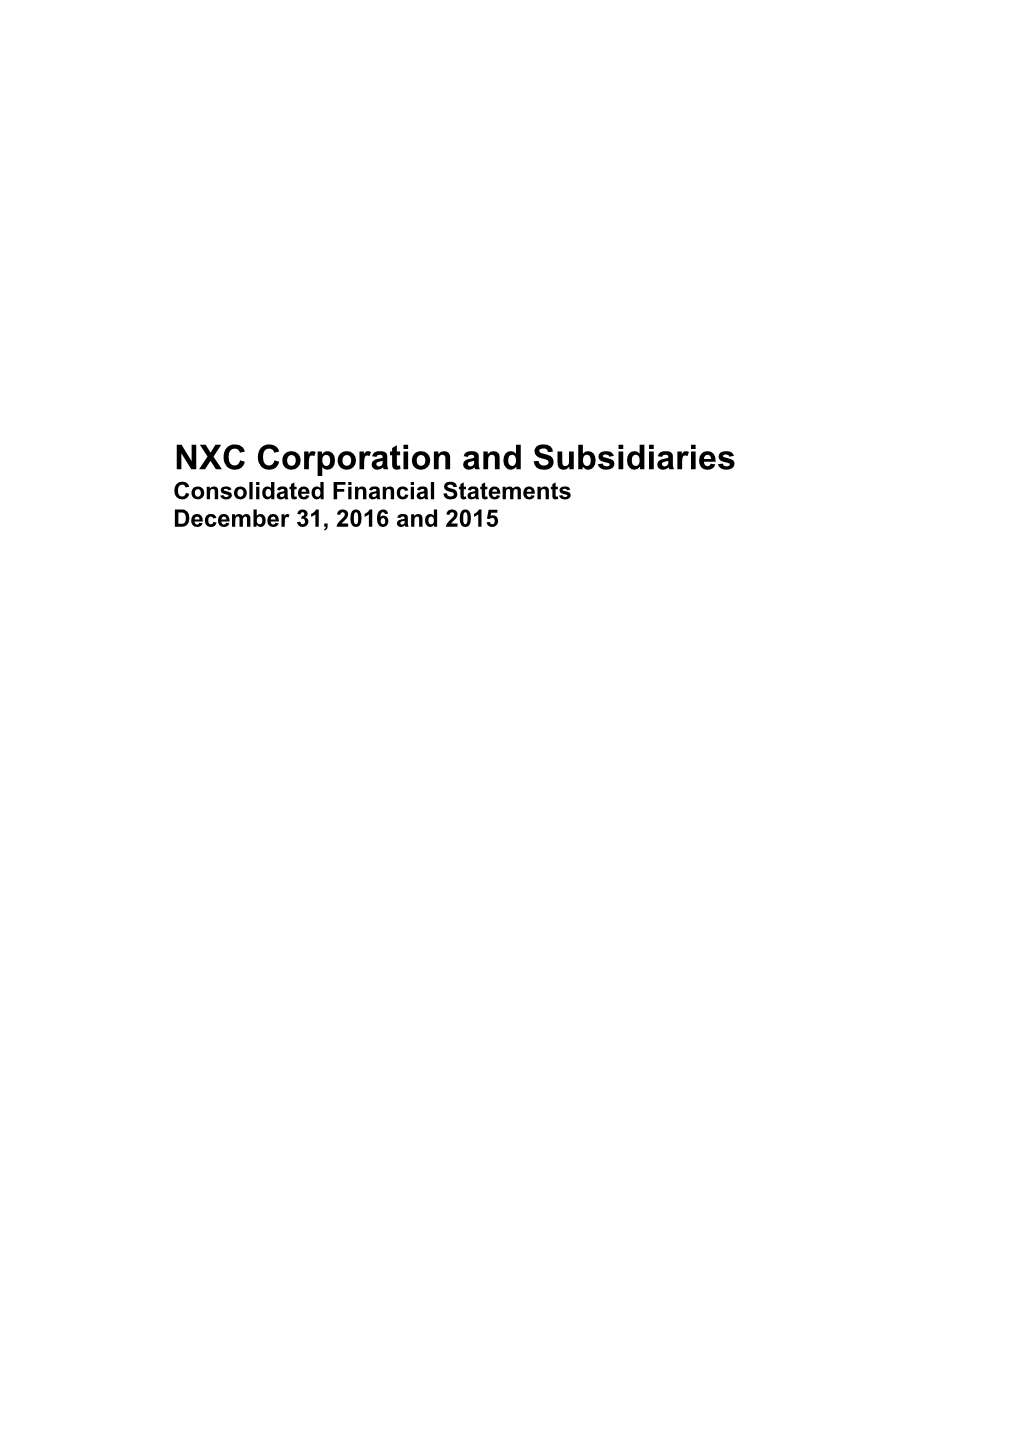 NXC Corporation and Subsidiaries Consolidated Financial Statements December 31, 2016 and 2015 NXC Corporation and Subsidiaries Index December 31, 2016 and 2015